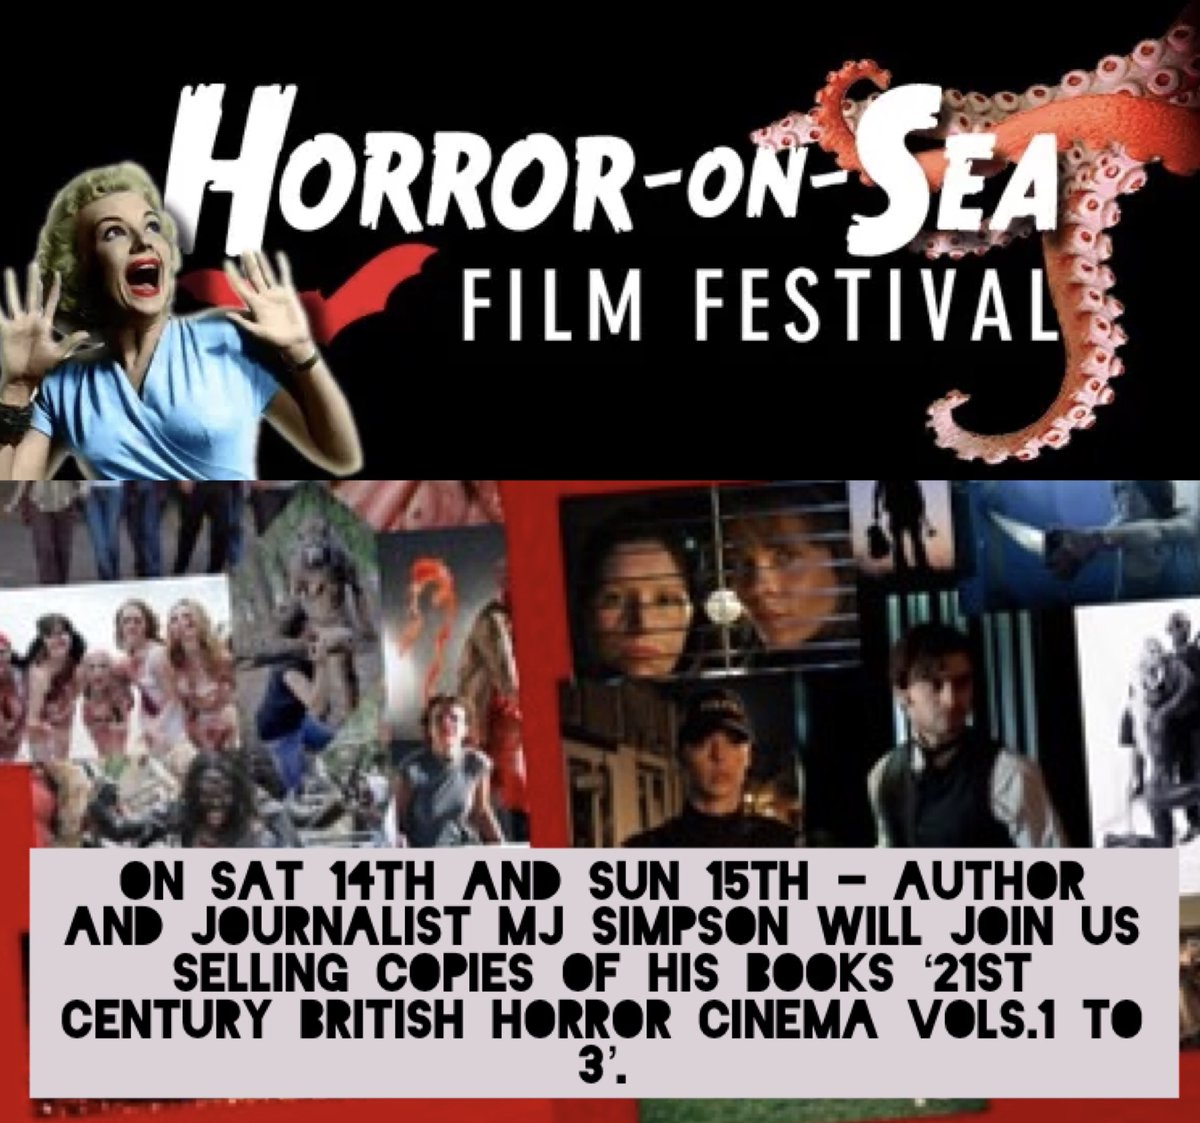 MJ Simpson will join us on for weekend 1 (14 and 15 Jan) with copies of 21st Century British Horror Films Vols. 1-3! 
Still need a ticket?!!  🎟 available from horror-on-sea.com or the festival desk! #HorrorNews #NewHorrorFilms #BritishHorror #UKHorror #HorrorCommunity